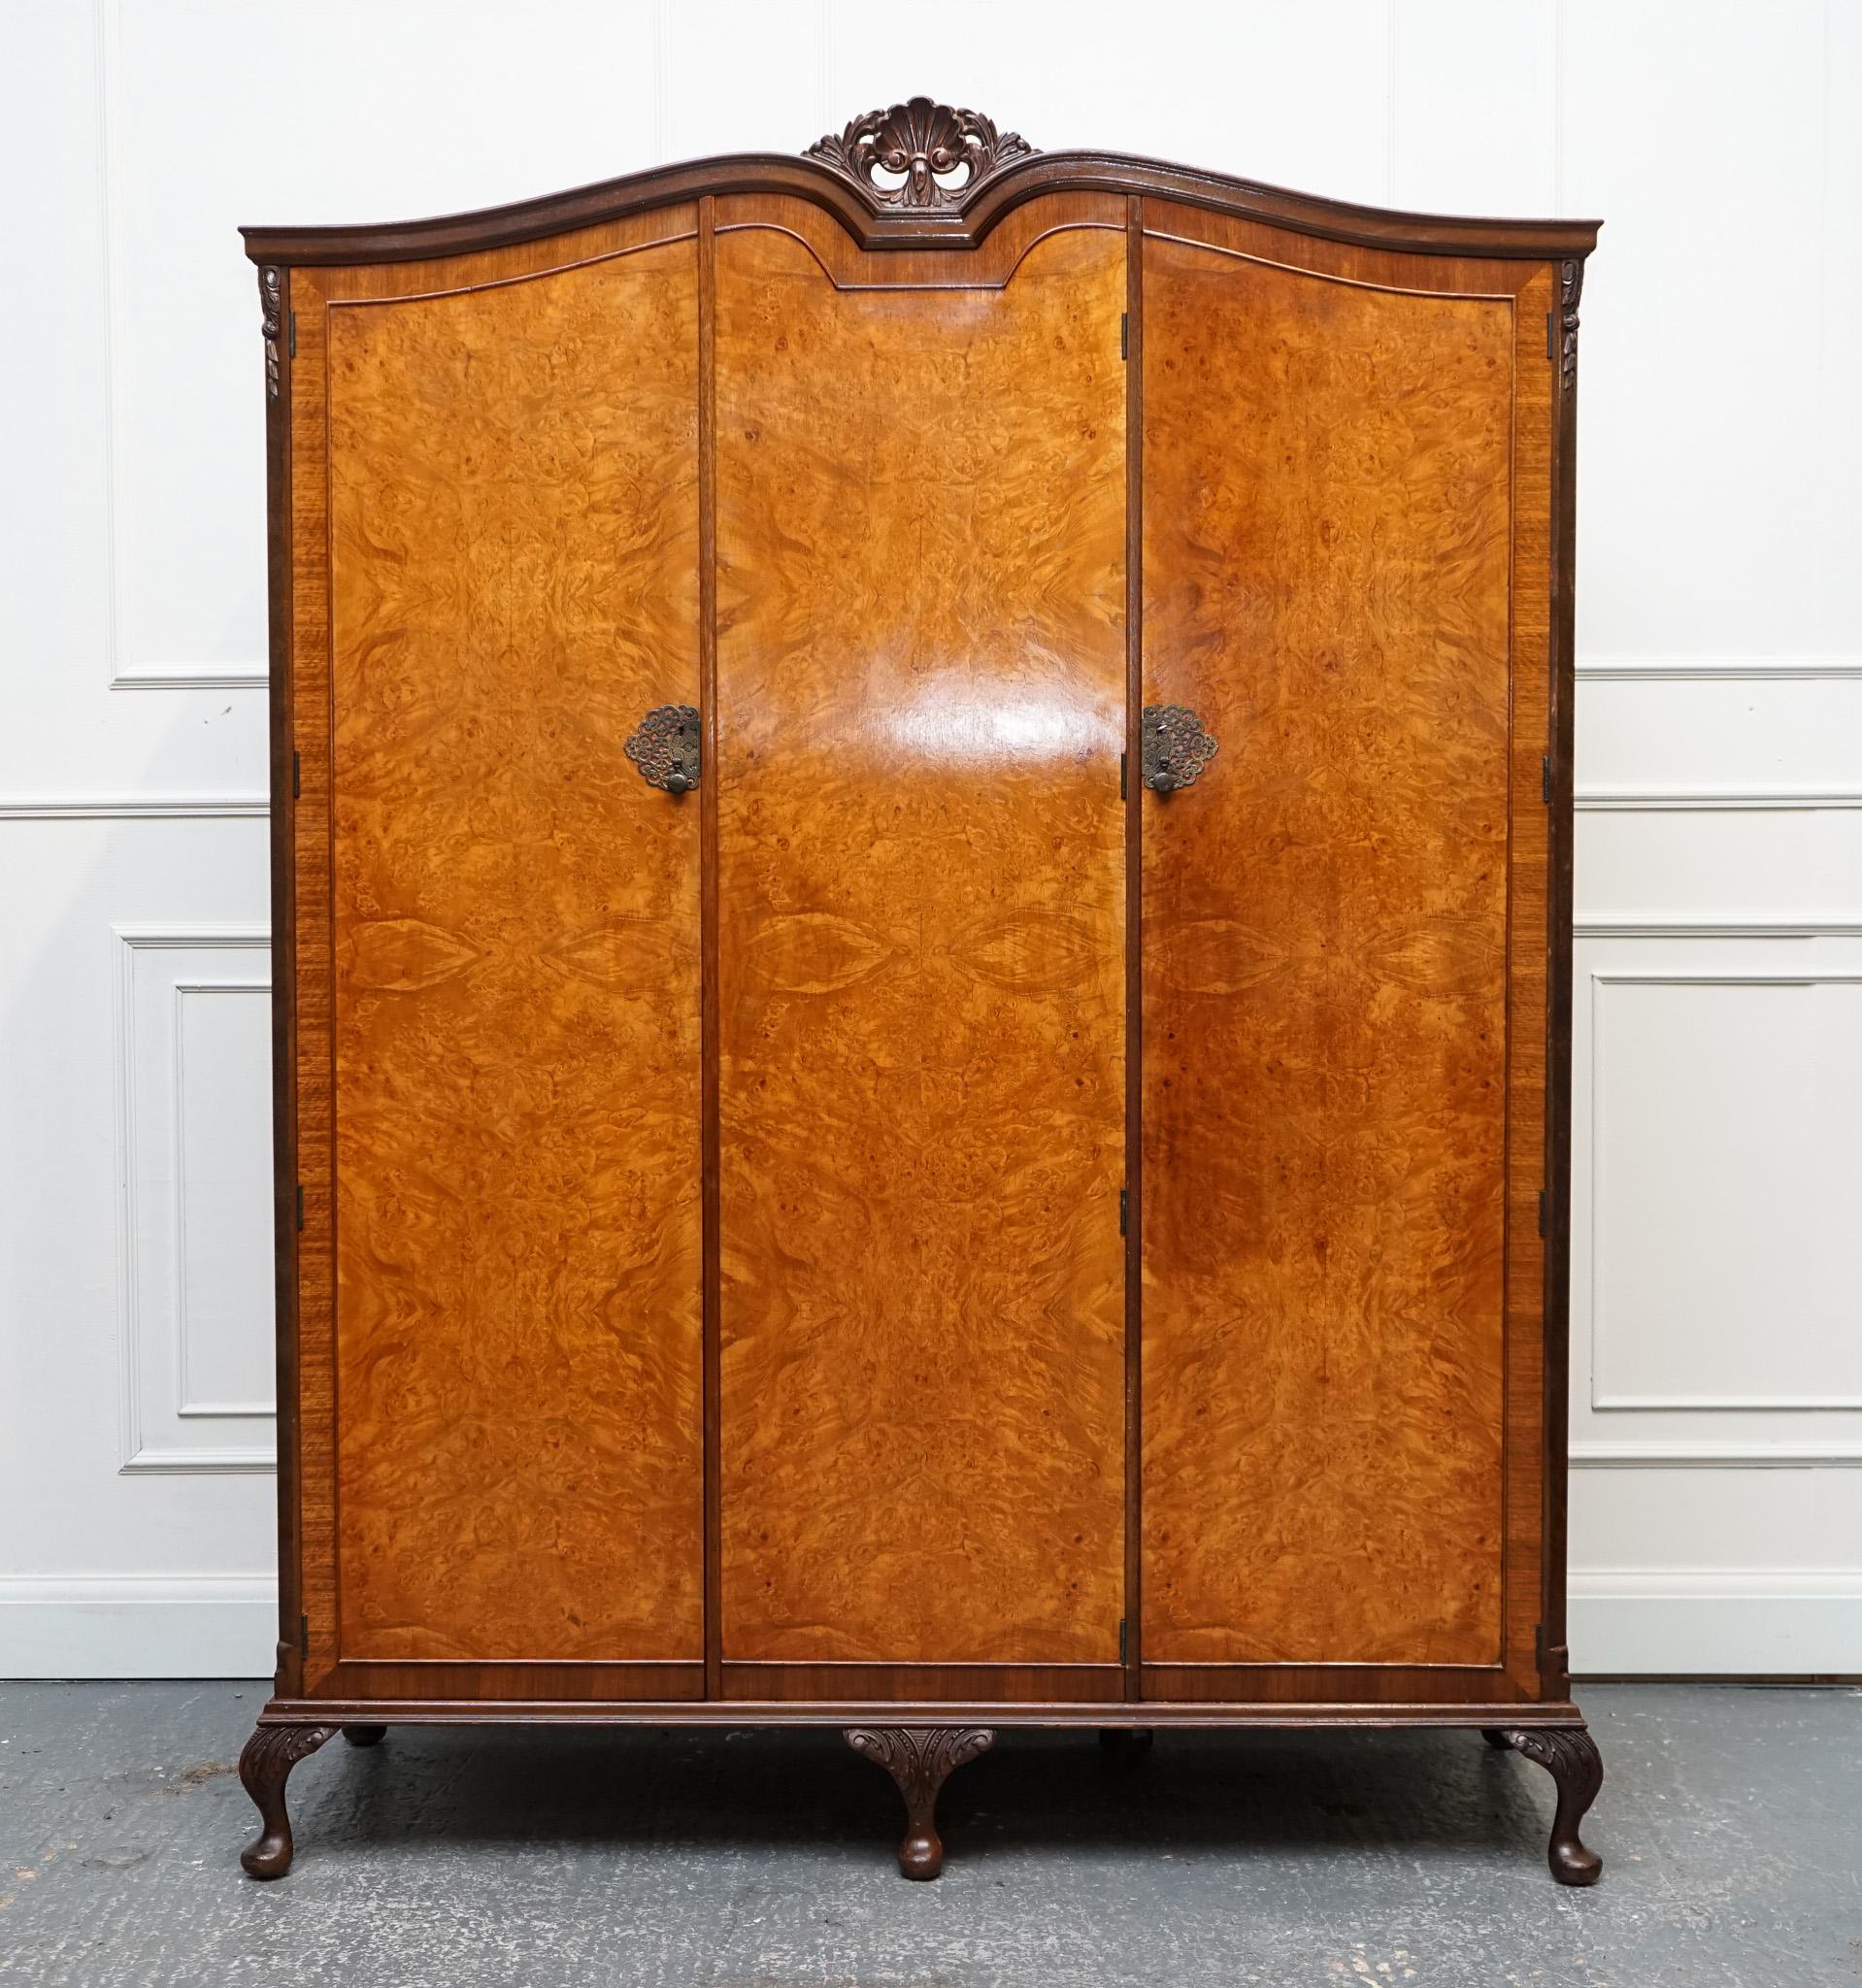 
We are delighted to offer for sale this Gorgeous Victoria Regina Distressed Art Deco Burr Walnut Triple Wardrobe.

The lock on the wardrobe engraved V.R which is Victoria Regina. 

A very solid and well made wardrobe, three of the doors have been